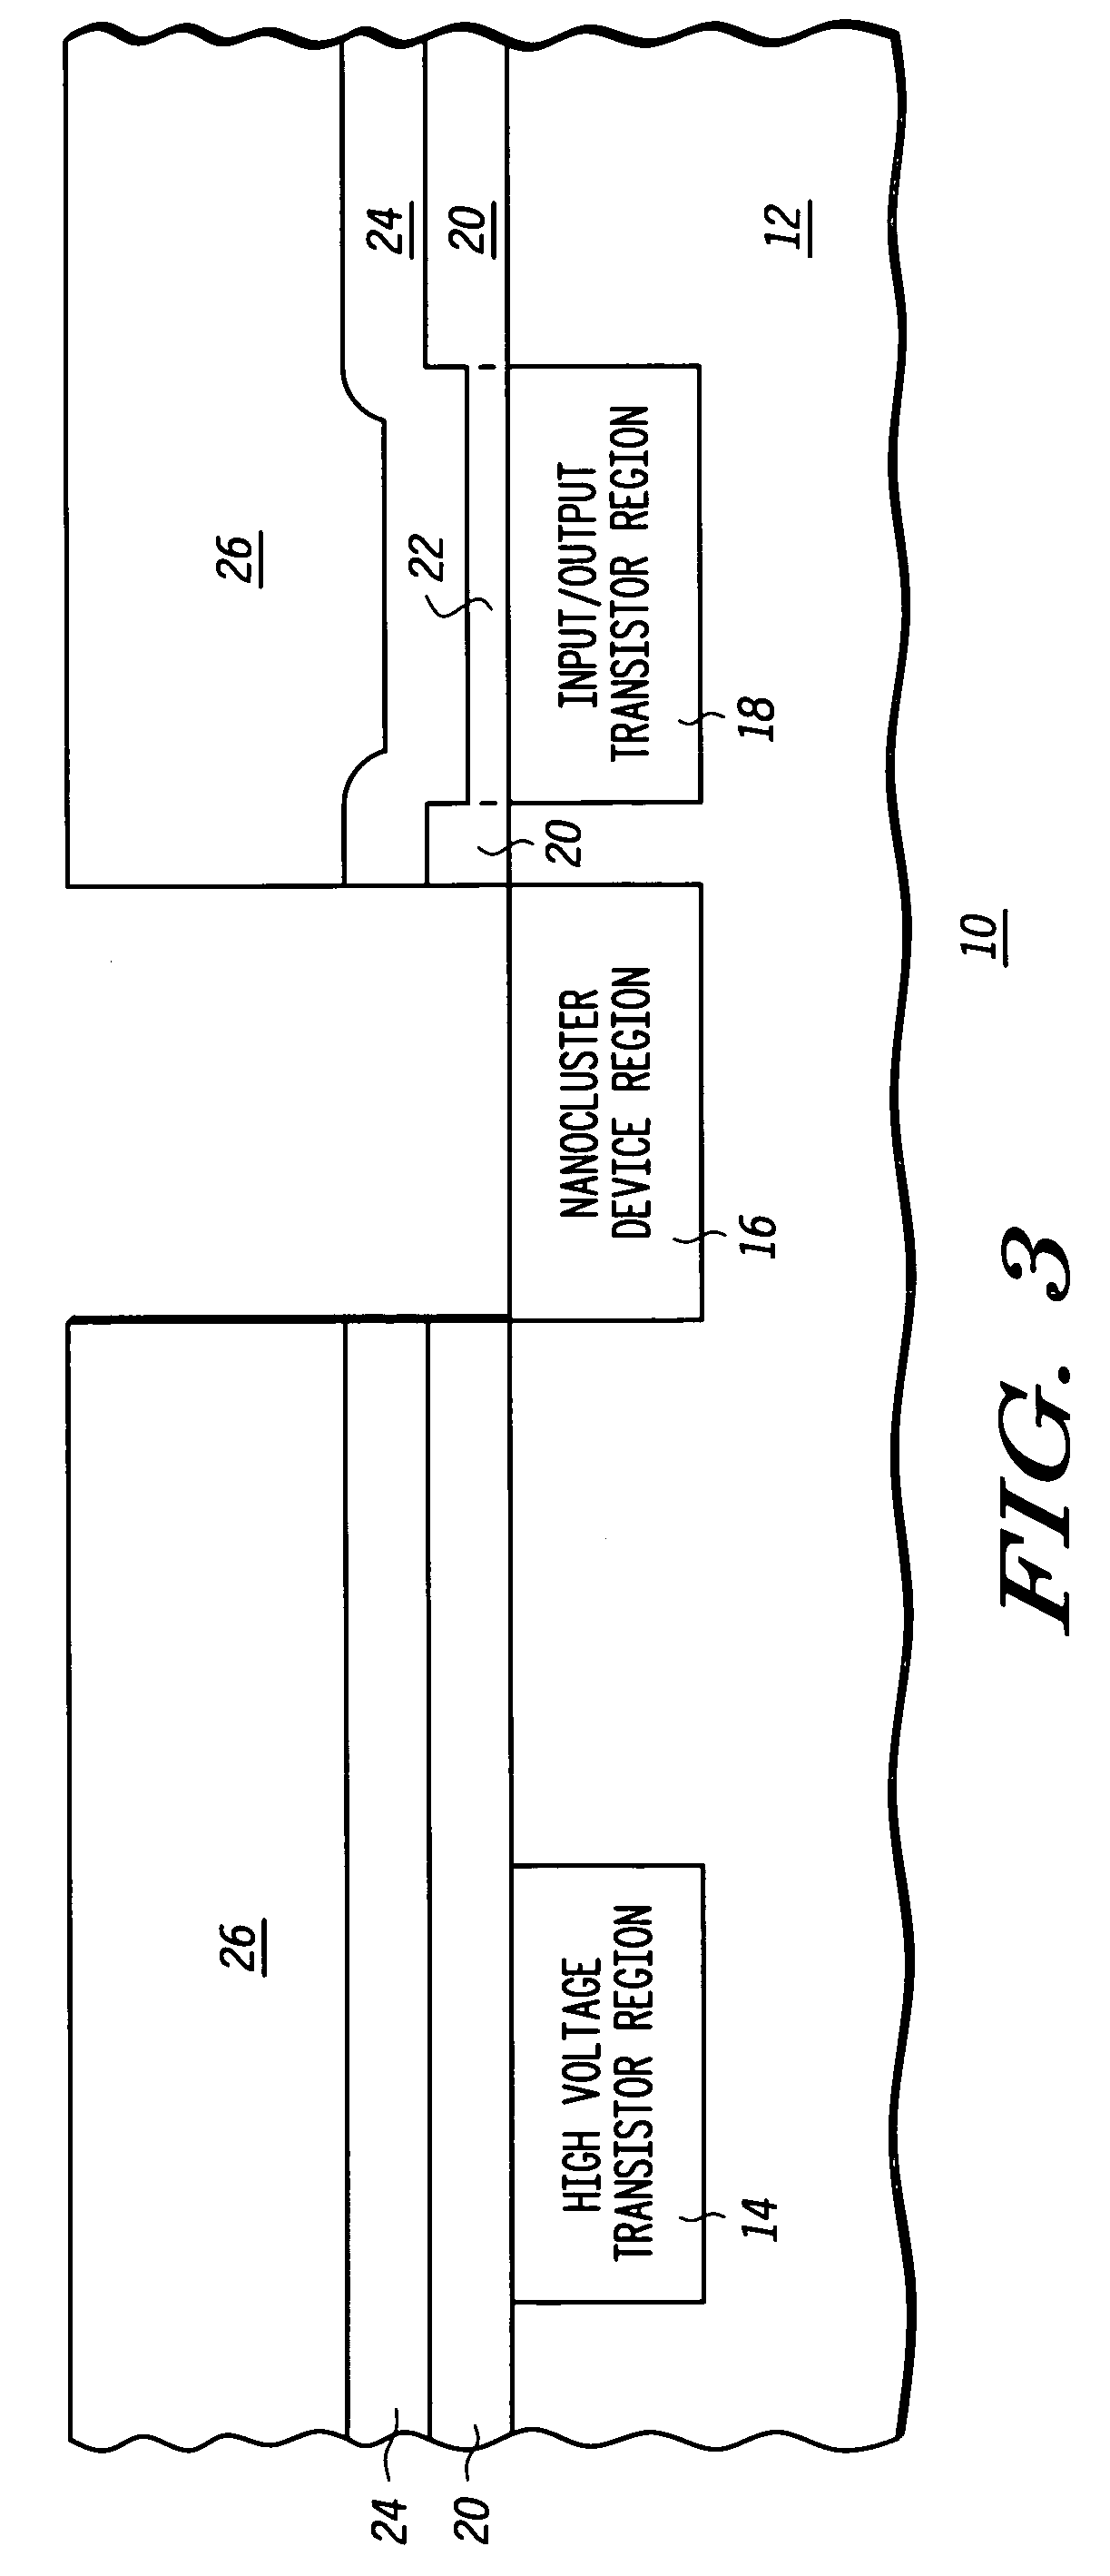 Method of forming an integrated circuit having nanocluster devices and non-nanocluster devices